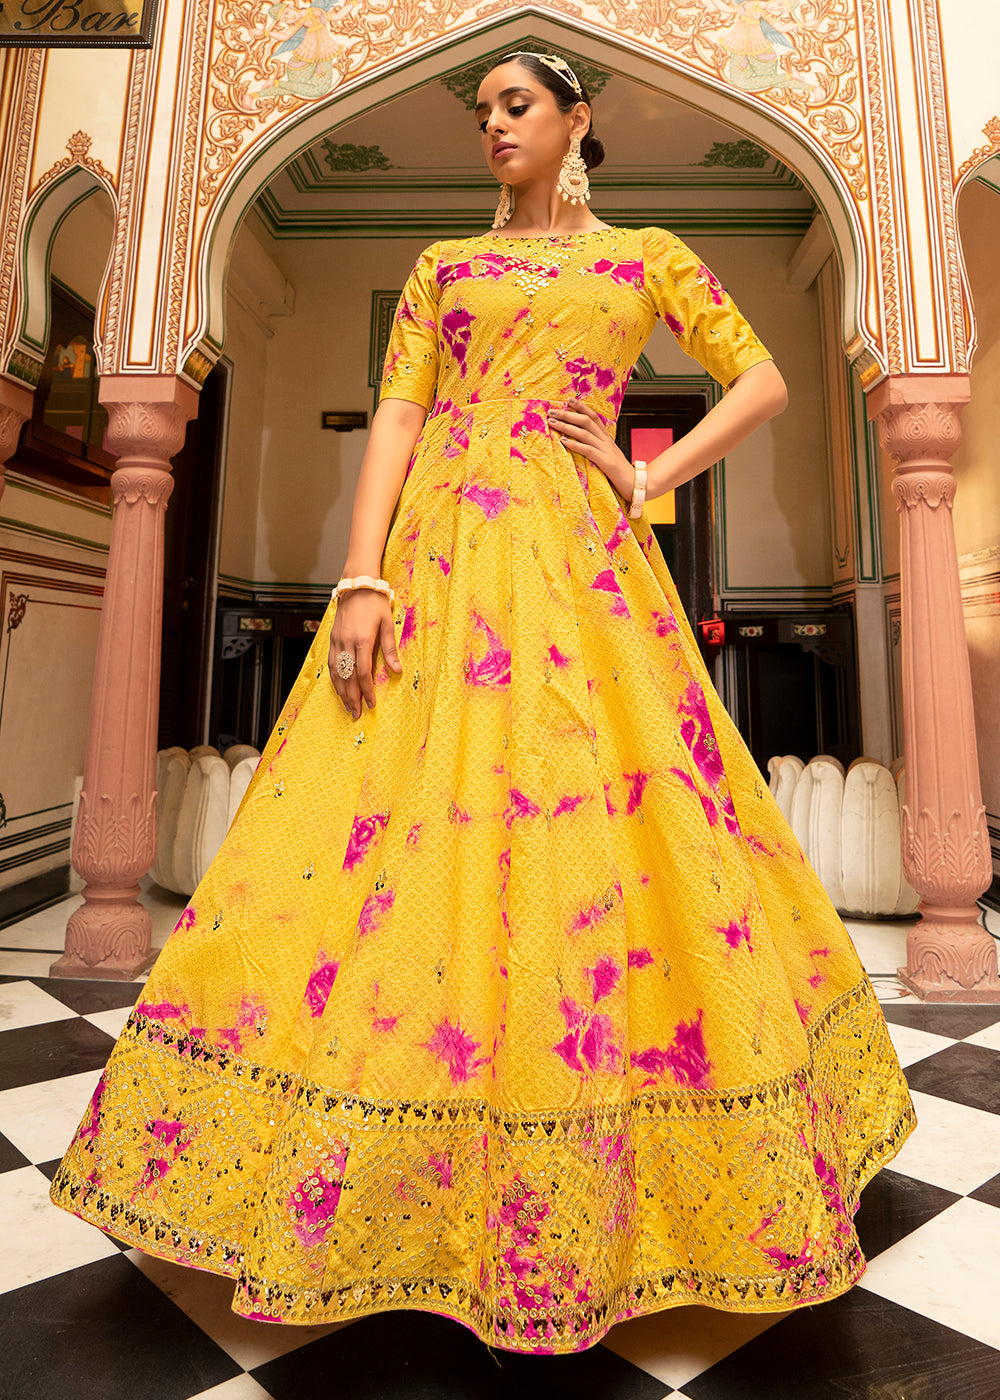 Buy Now Yellow Shibori Print Embroidered Floor Length Cotton Gown Online in USA, UK, Australia, New Zealand, Canada & Worldwide at Empress Clothing. 